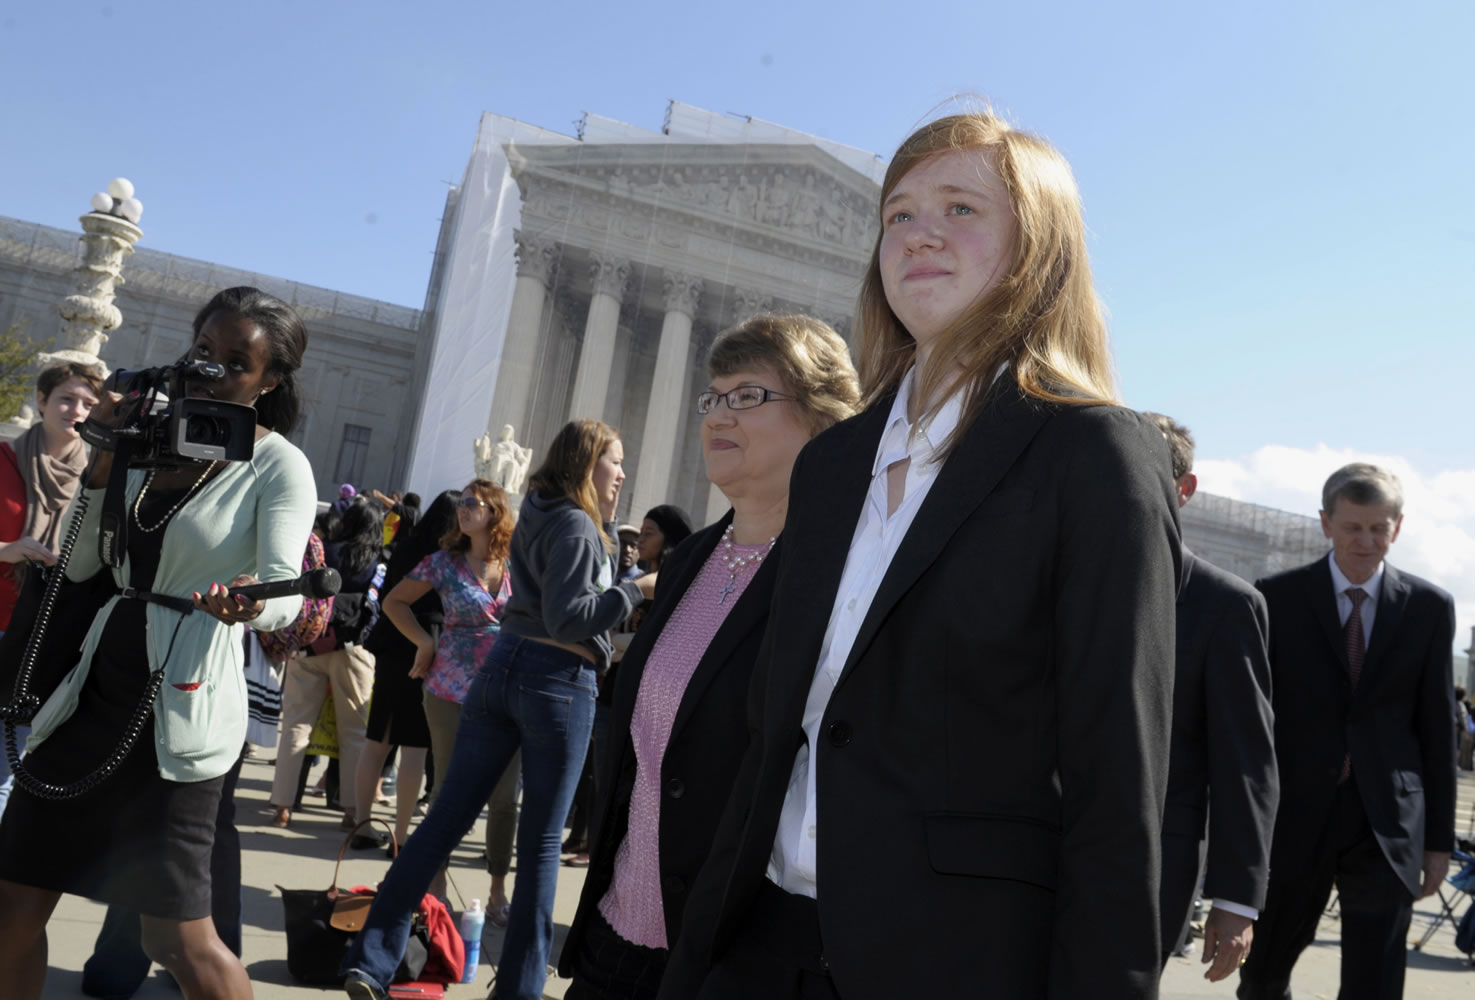 Abigail Fisher, right, who sued the University of Texas, walks outside the Supreme Court in Washington on Oct. 10, 2012.